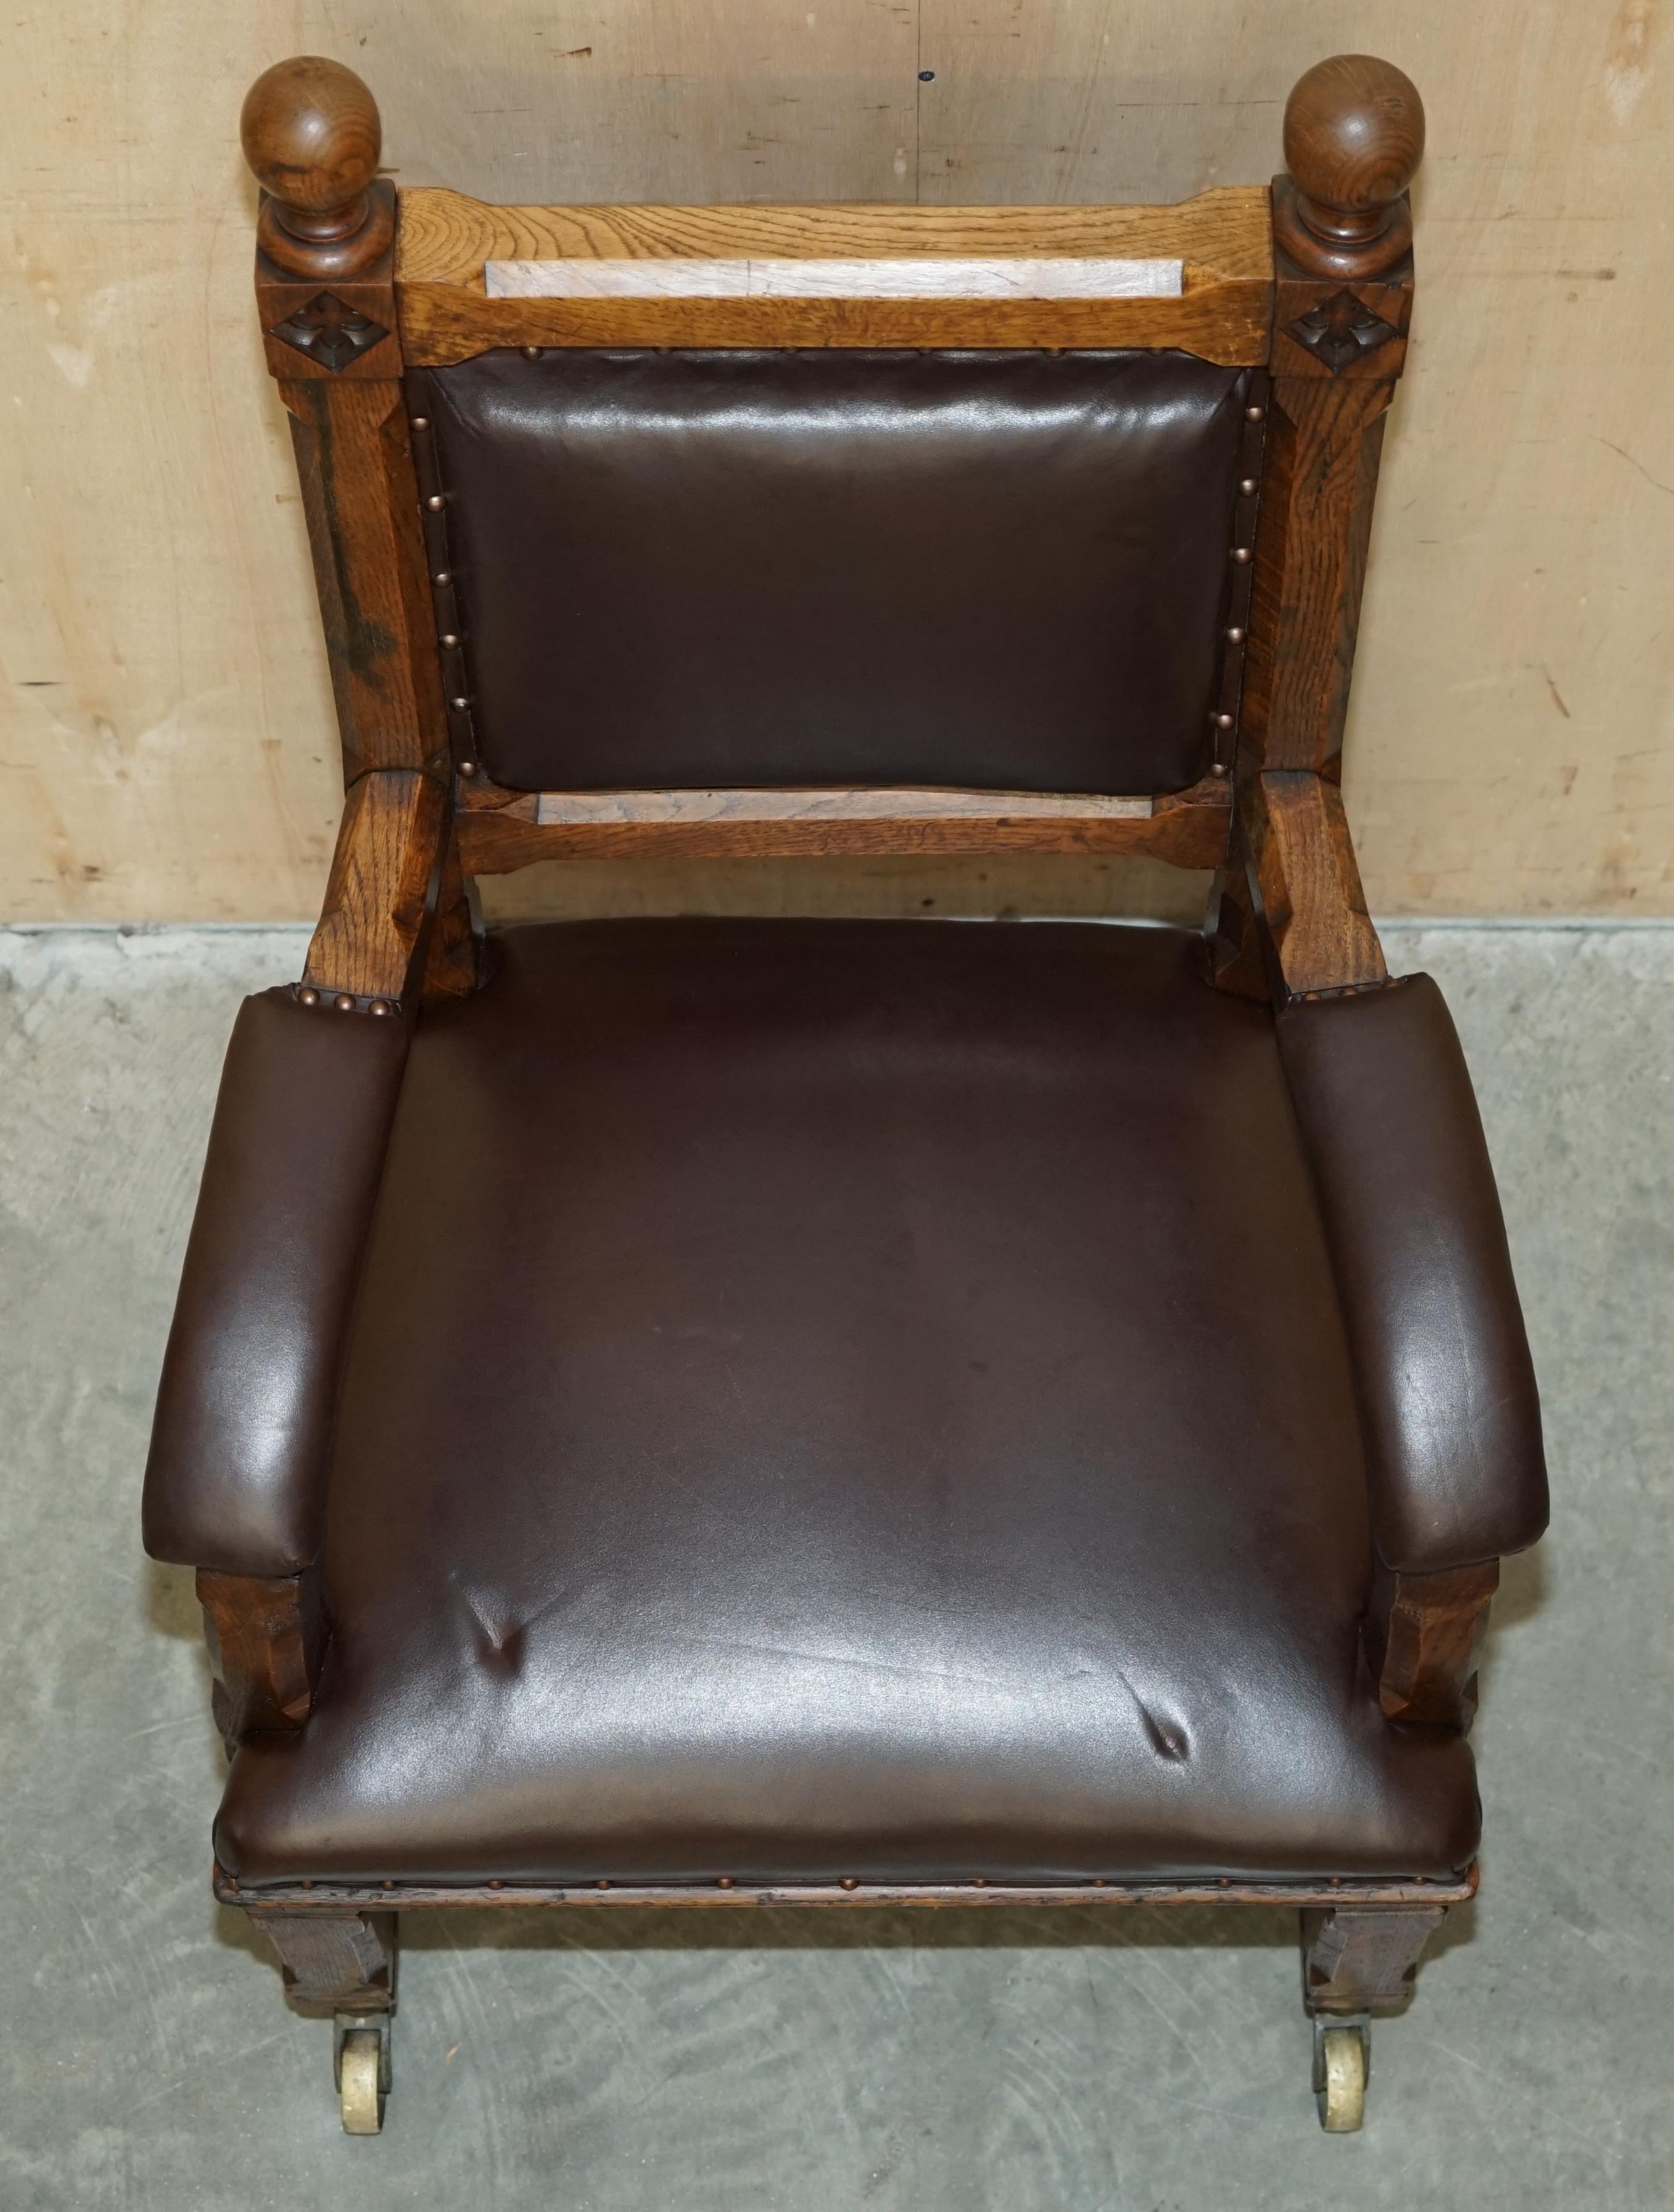 STUNNING ANTIQUE CIRCA 1880 GOTHIC REViVAL OAK PUGIN STYLE CARVER ARMCHAIR For Sale 5